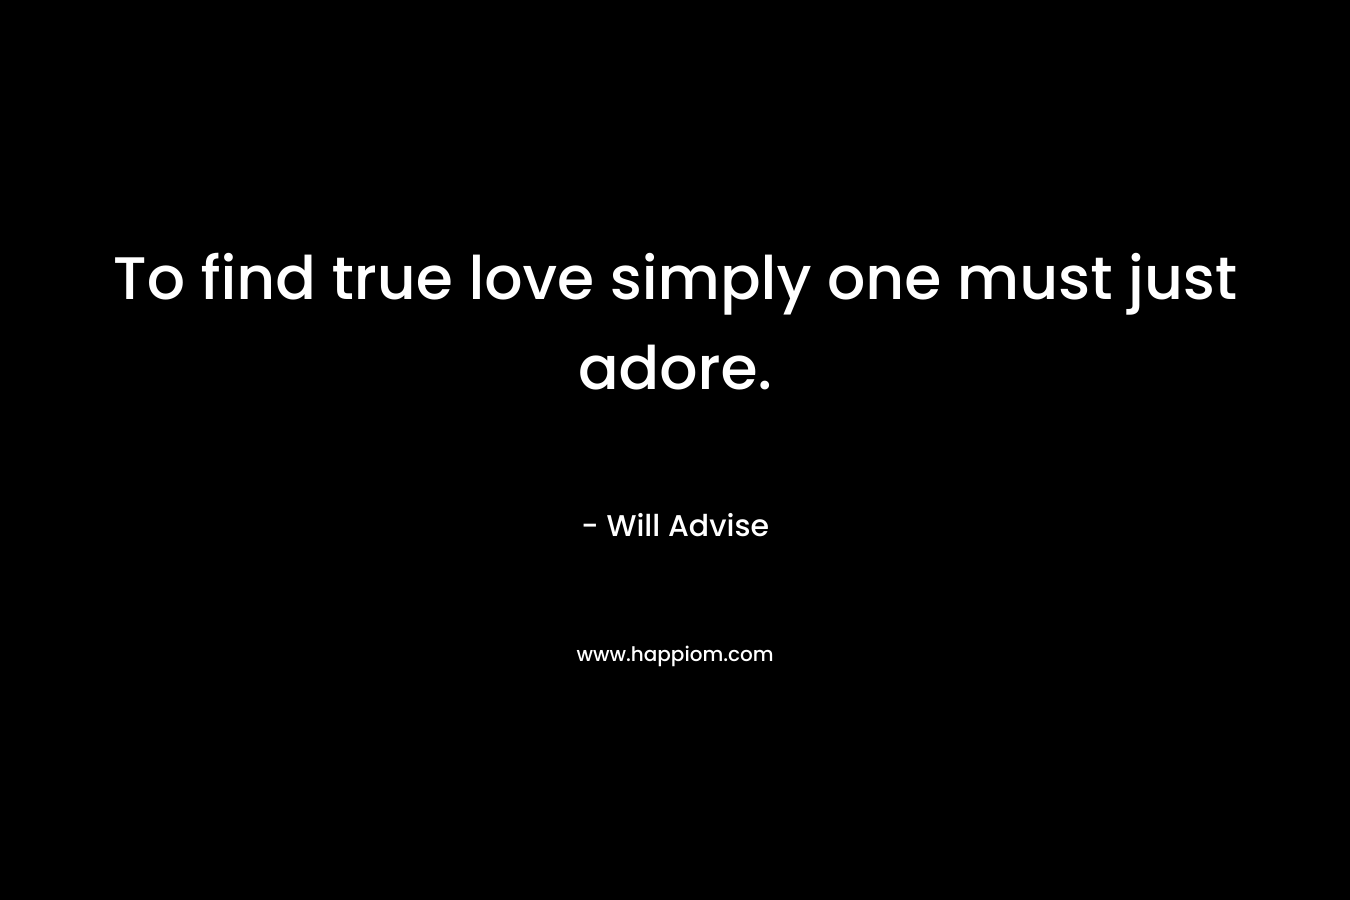 To find true love simply one must just adore. – Will Advise